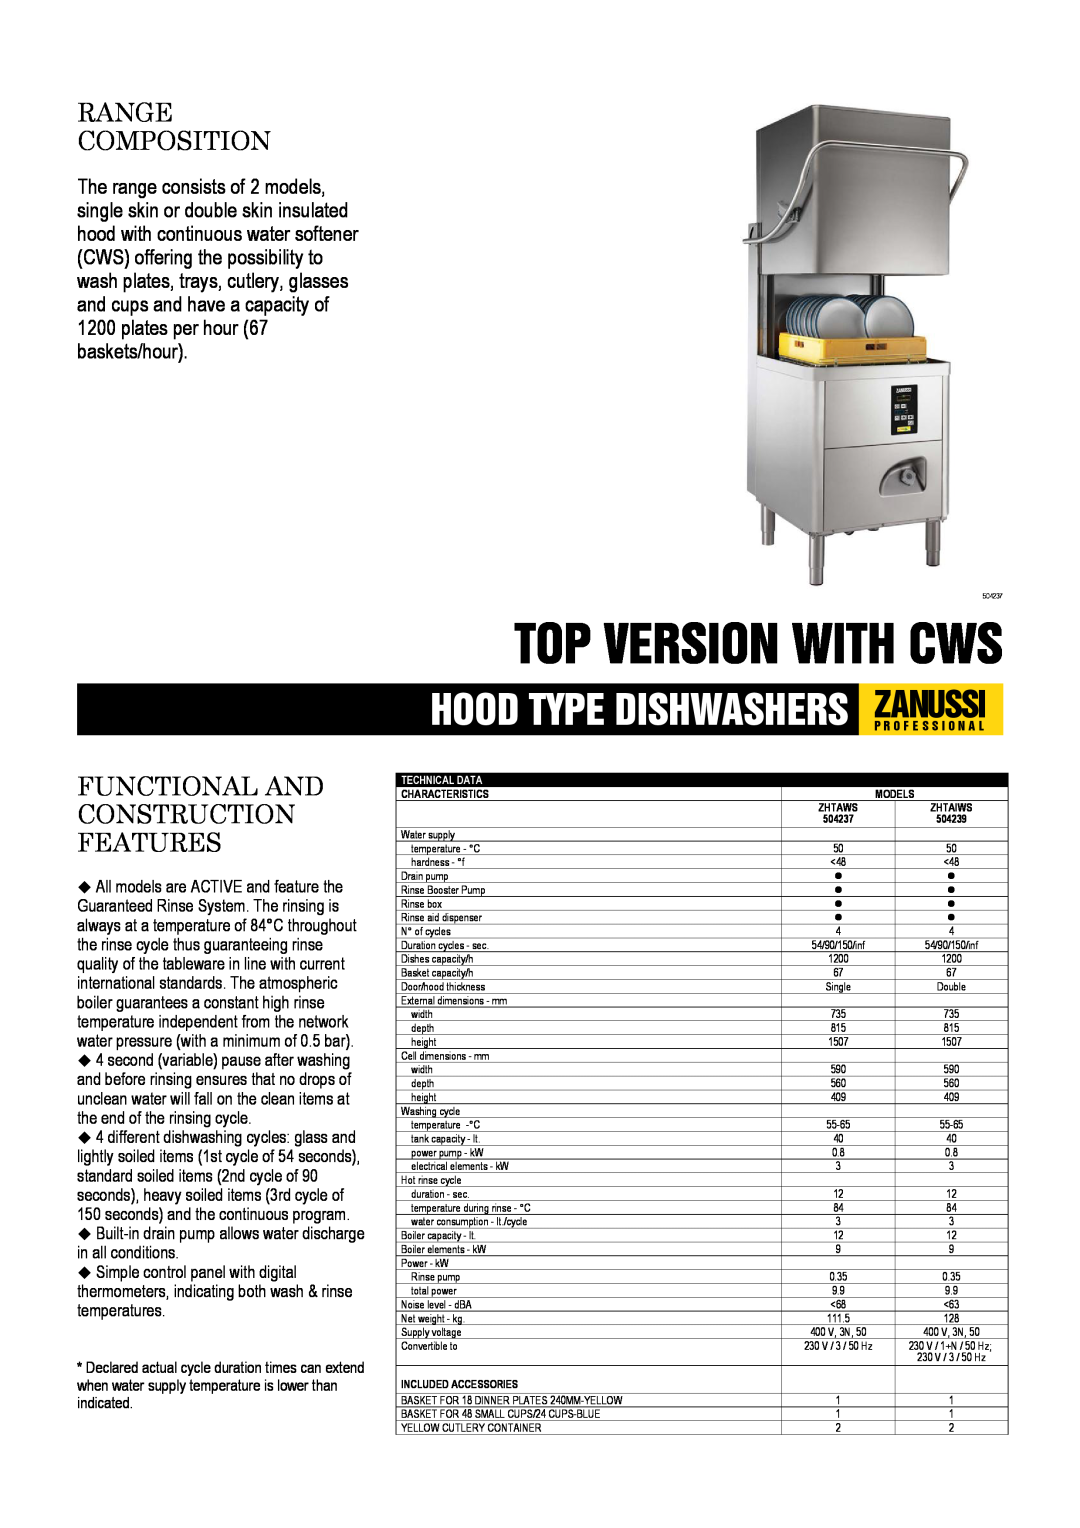 Zanussi 504237, 504239, ZHTAWS dimensions Top Version With Cws, Range Composition, Functional And Construction Features 